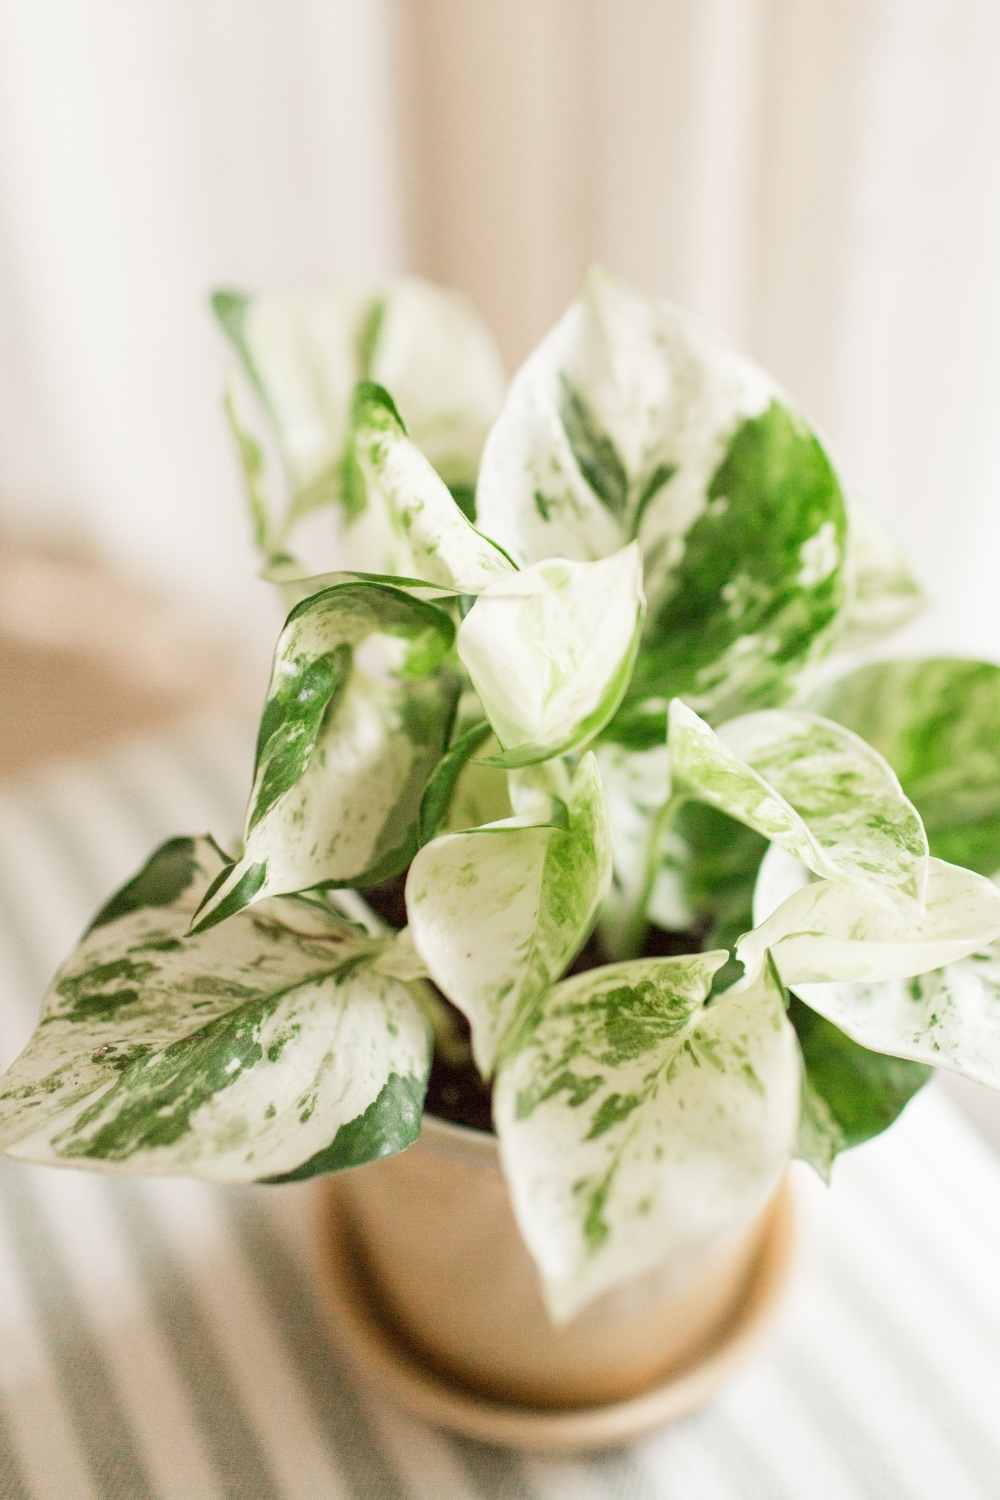 Pearls and Jade Pothos potted